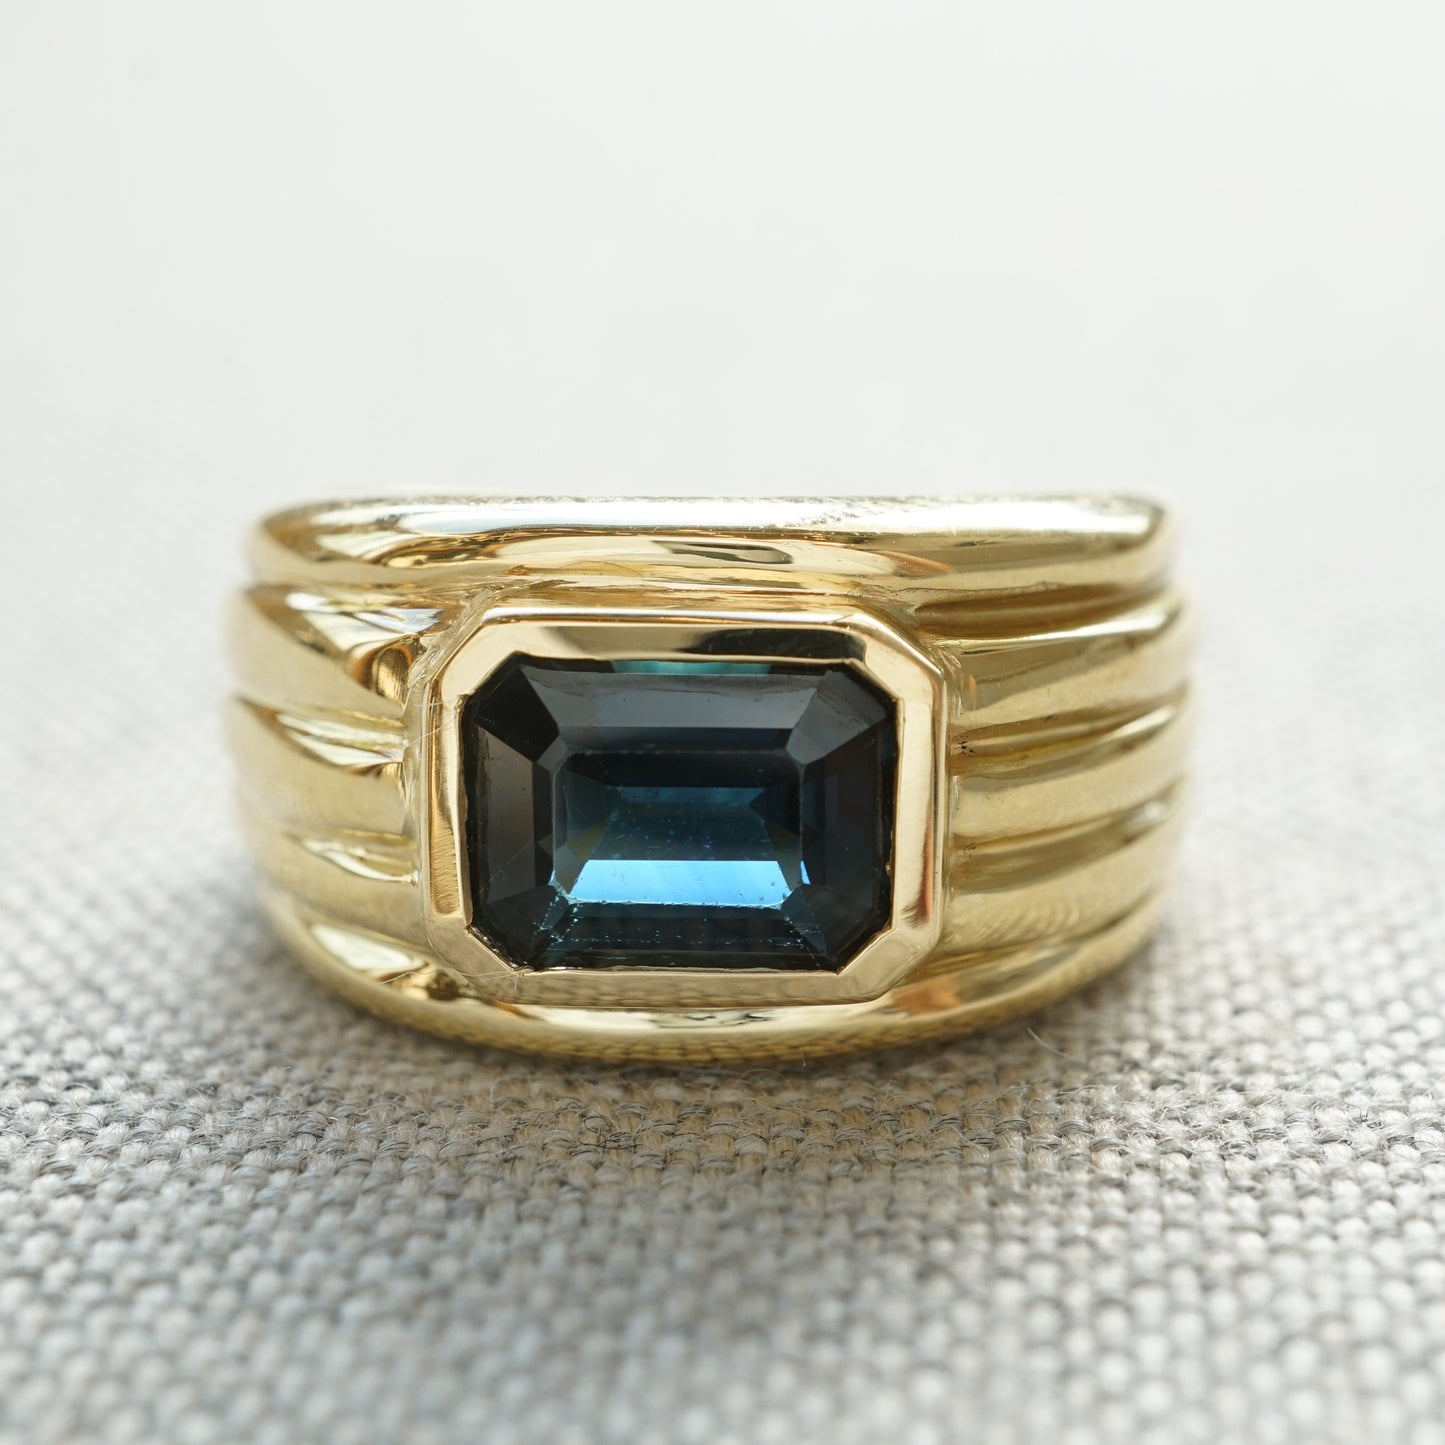 1.7 Emerald Cut Tourmaline Cocktail Ring in 18k Yellow Gold